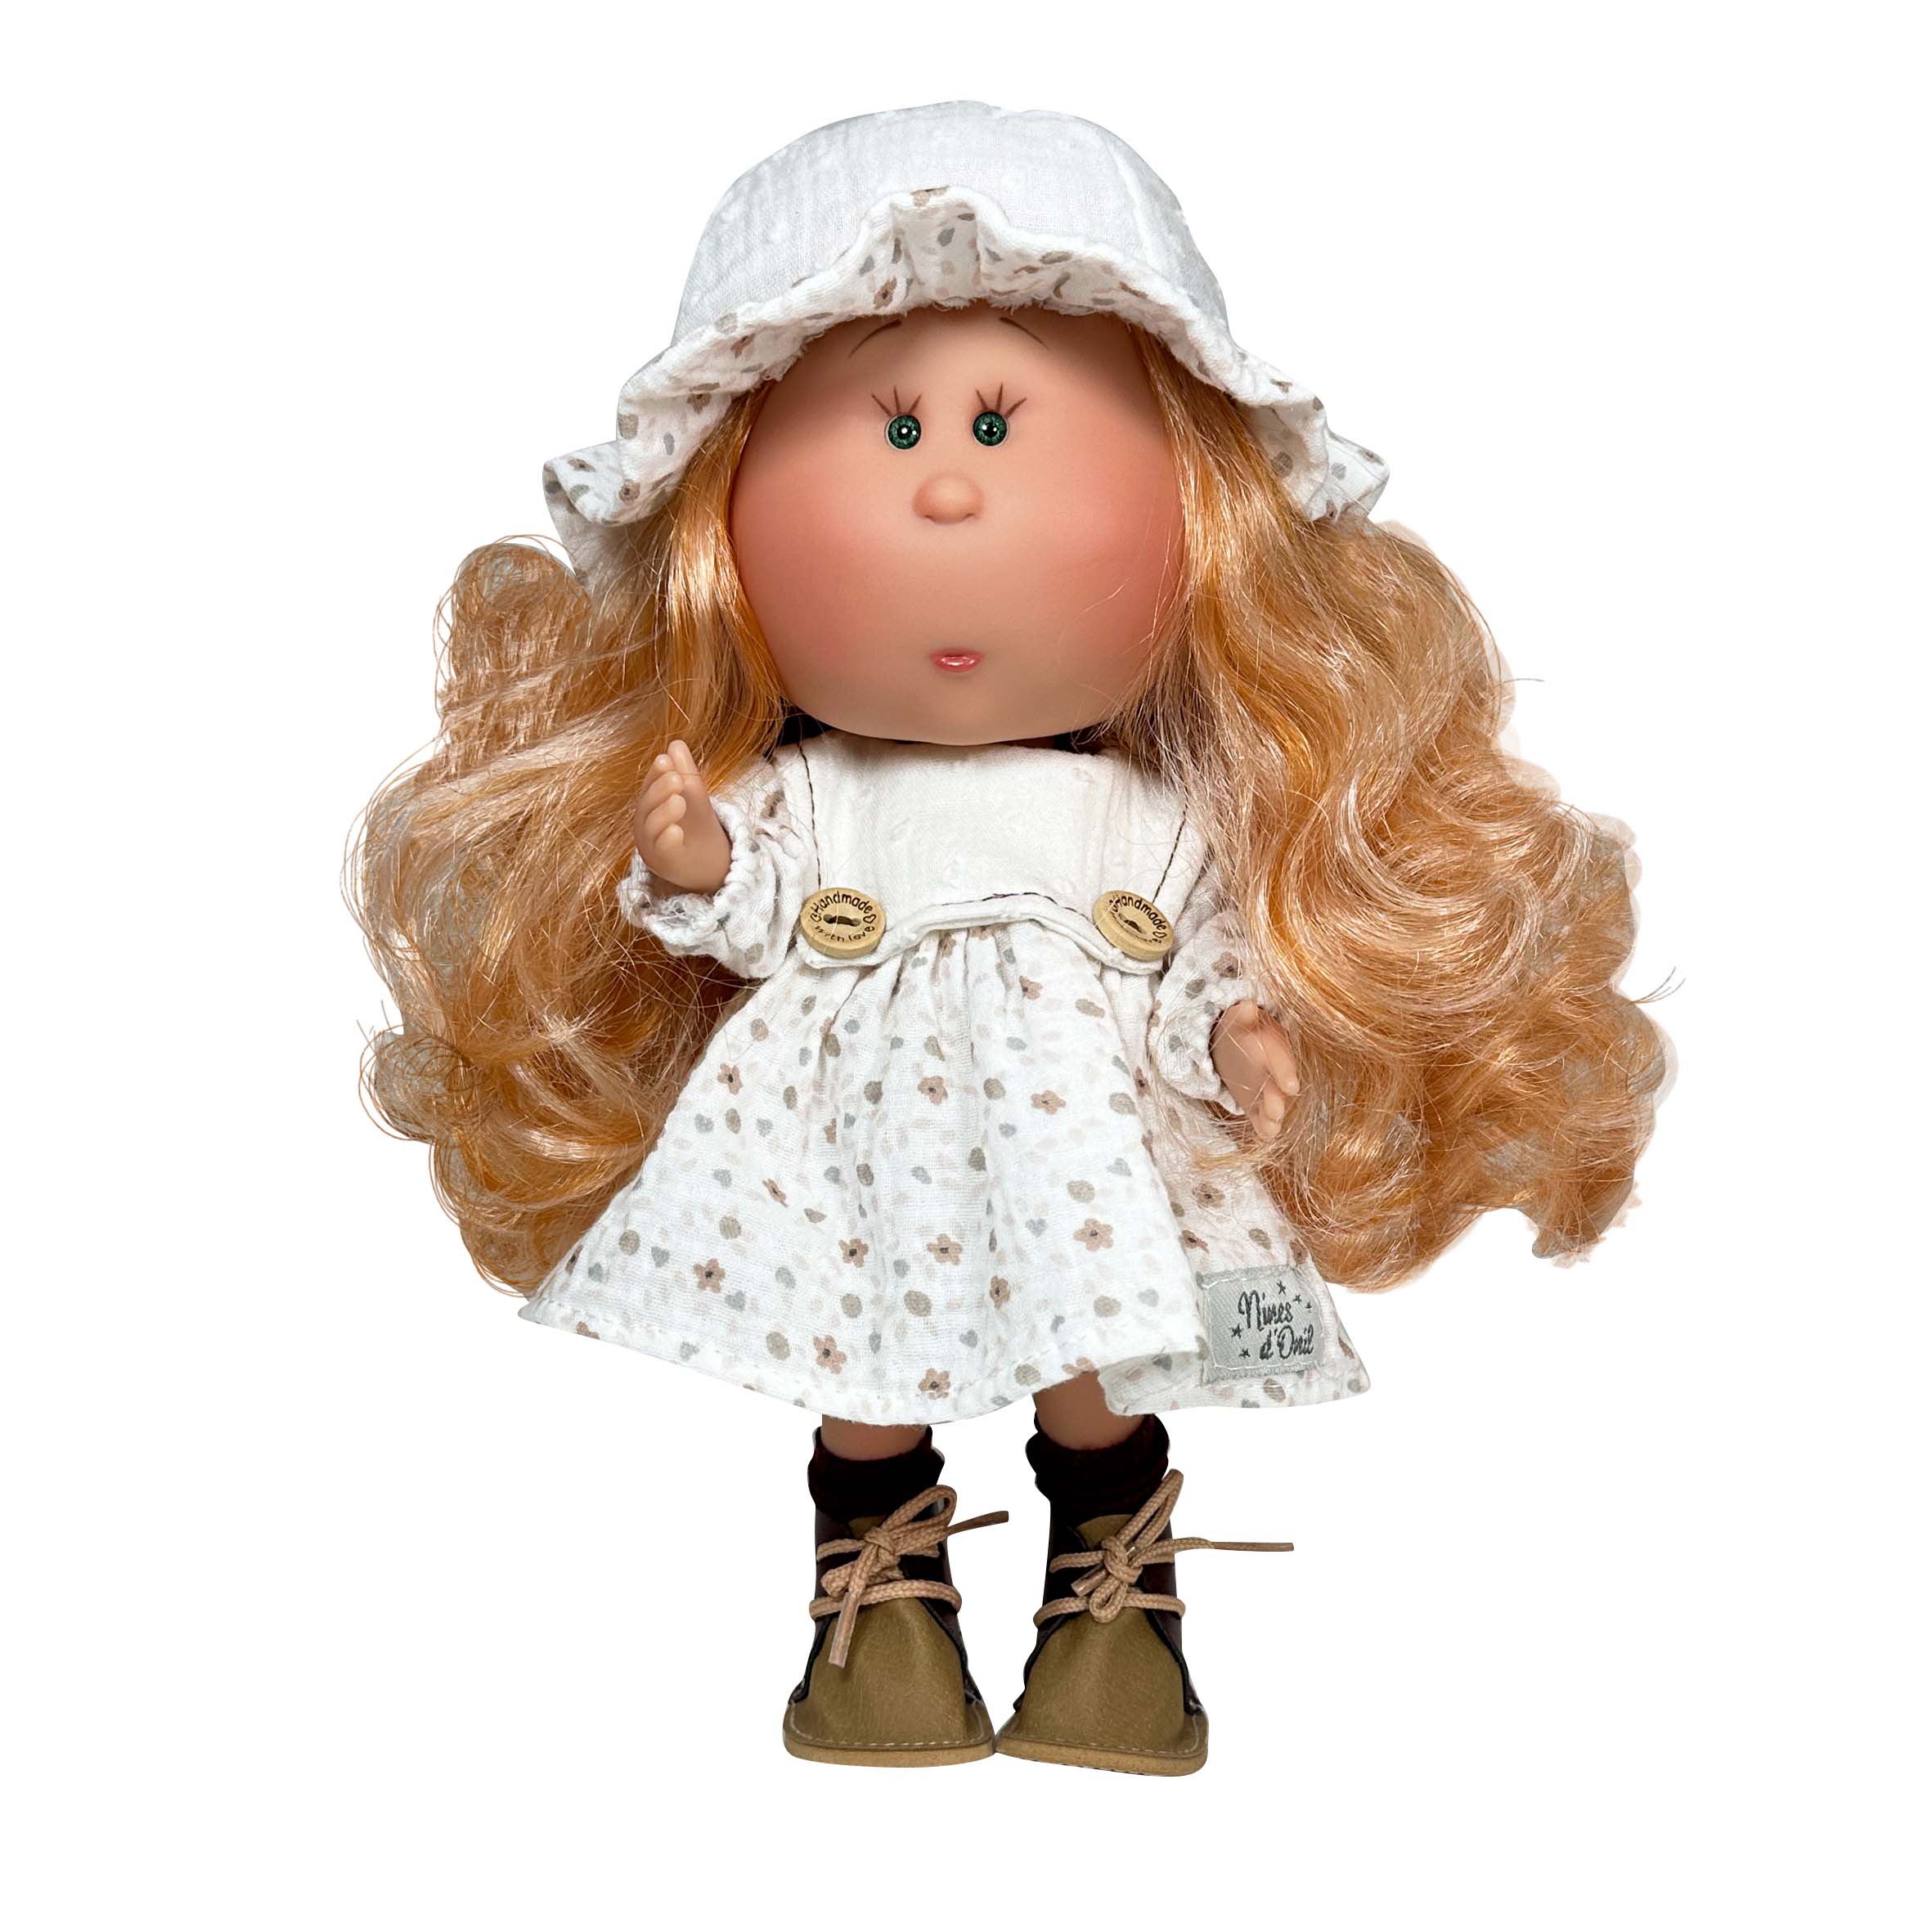 Handcrafted Collectible Mia Little Bo Peep Doll (3402) by Nines D&